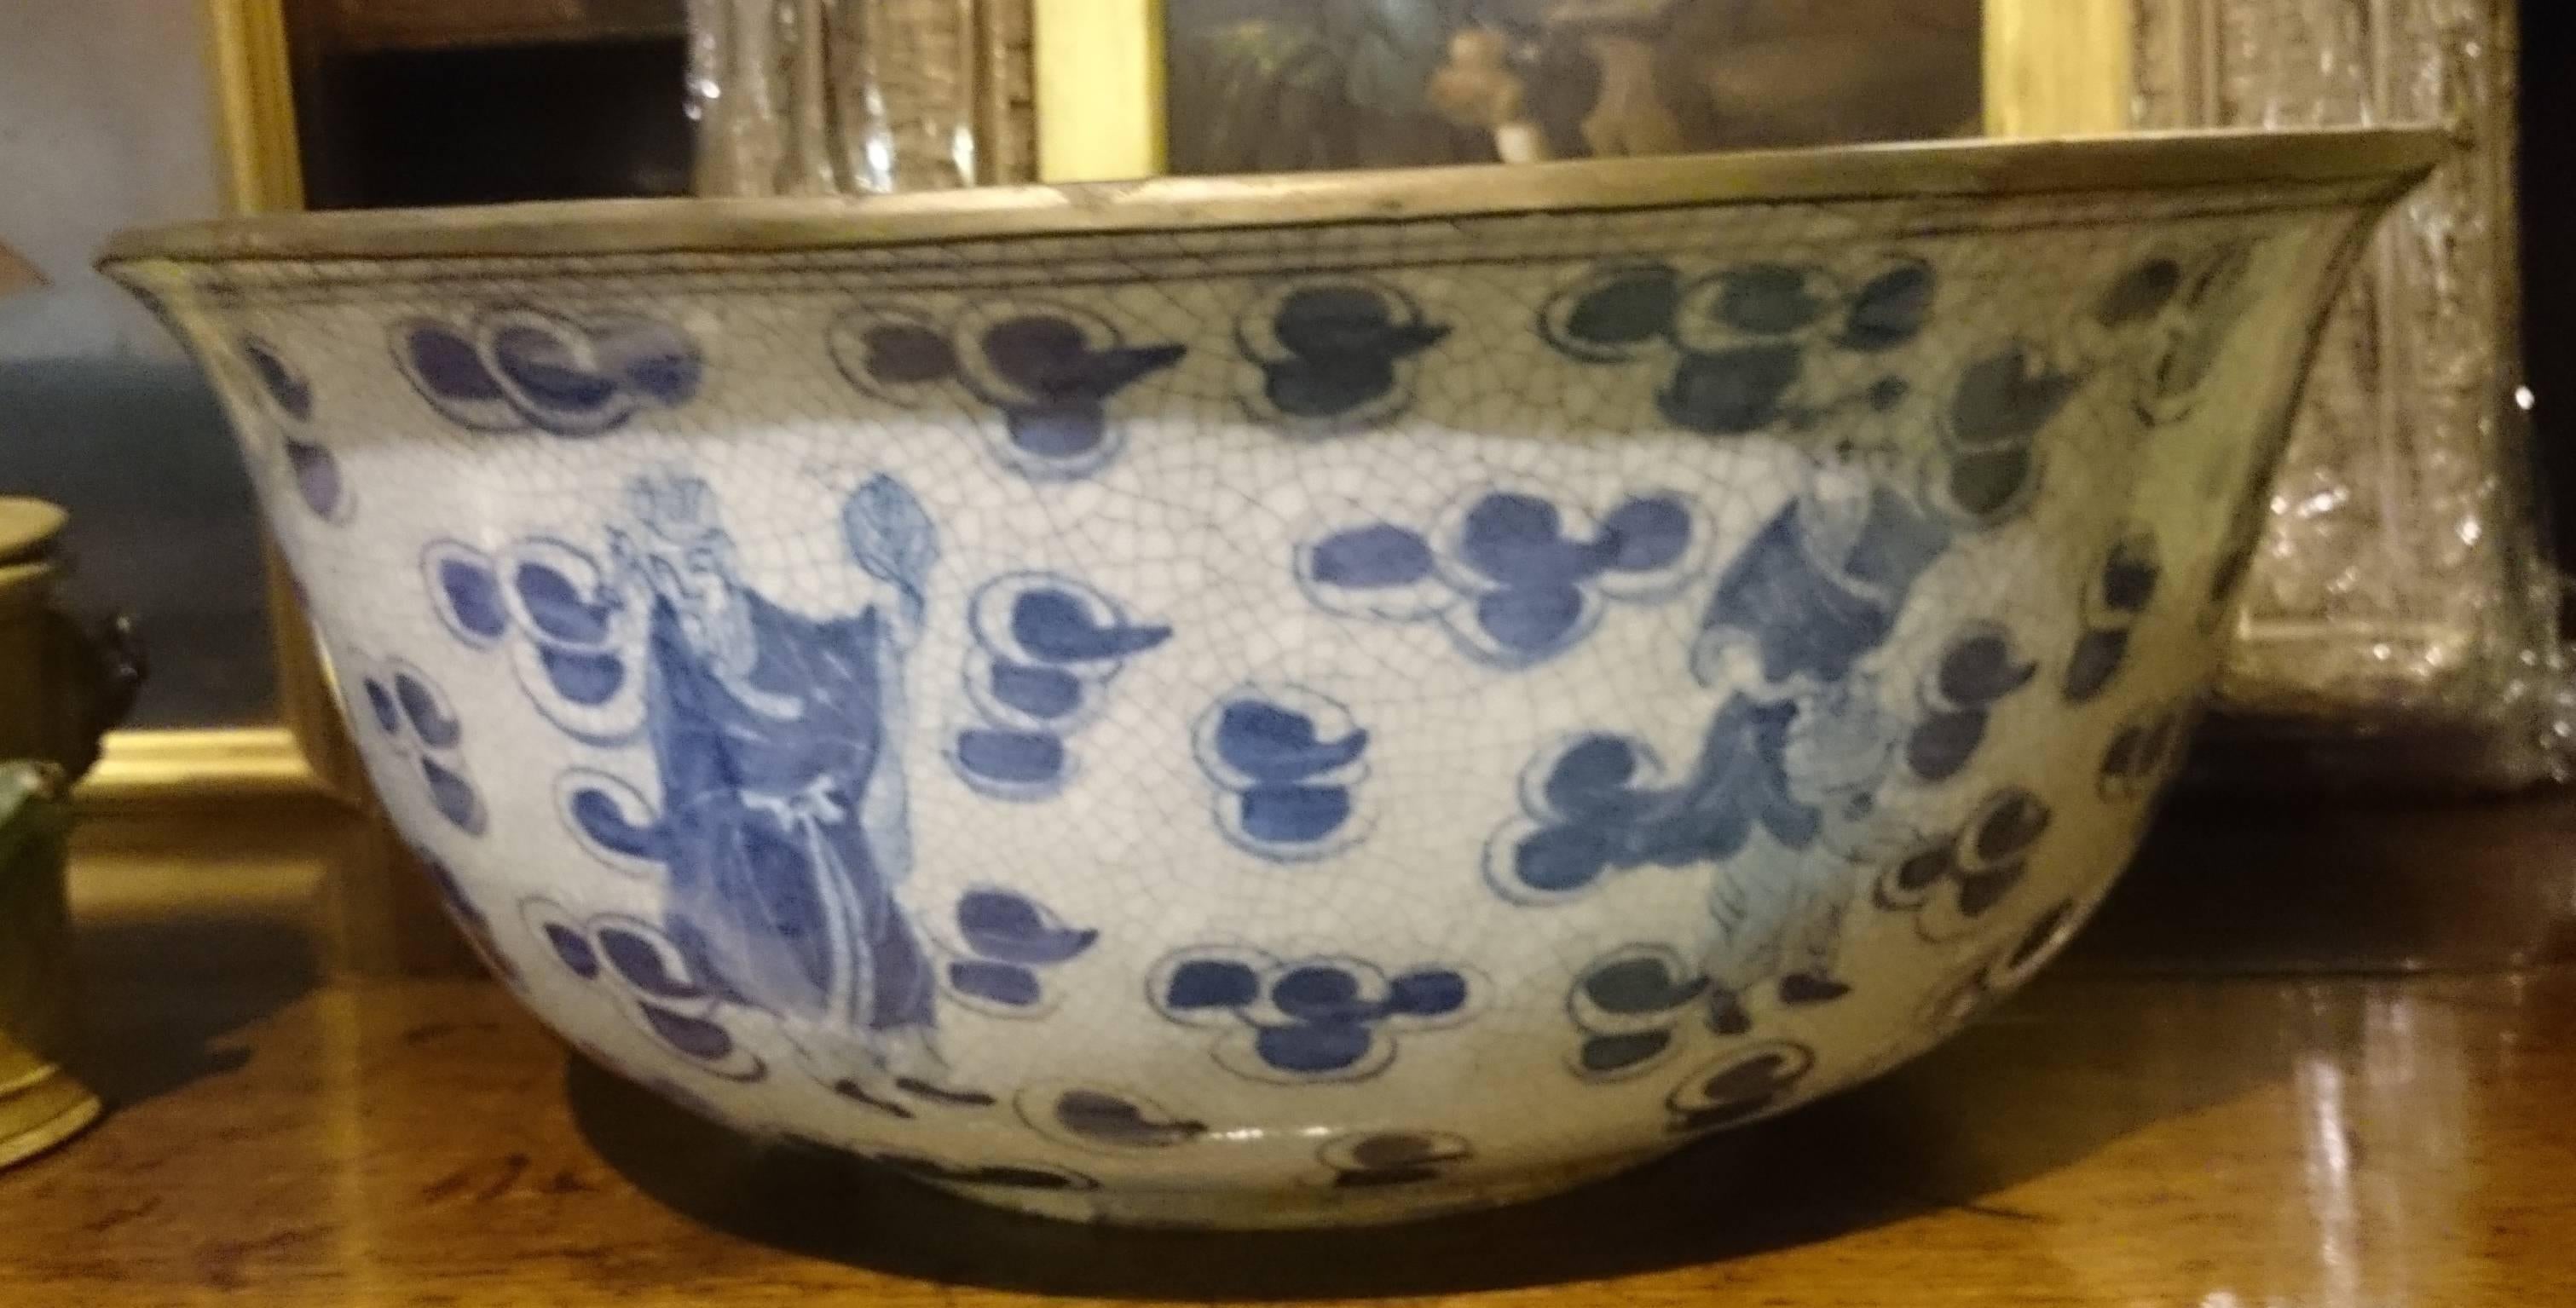 Large antique Chinese bowl with blue figures and other decoration. This is a good size, well decorated, probably by hand and good porcelain.

Chinese 19th century 
Measures:
14